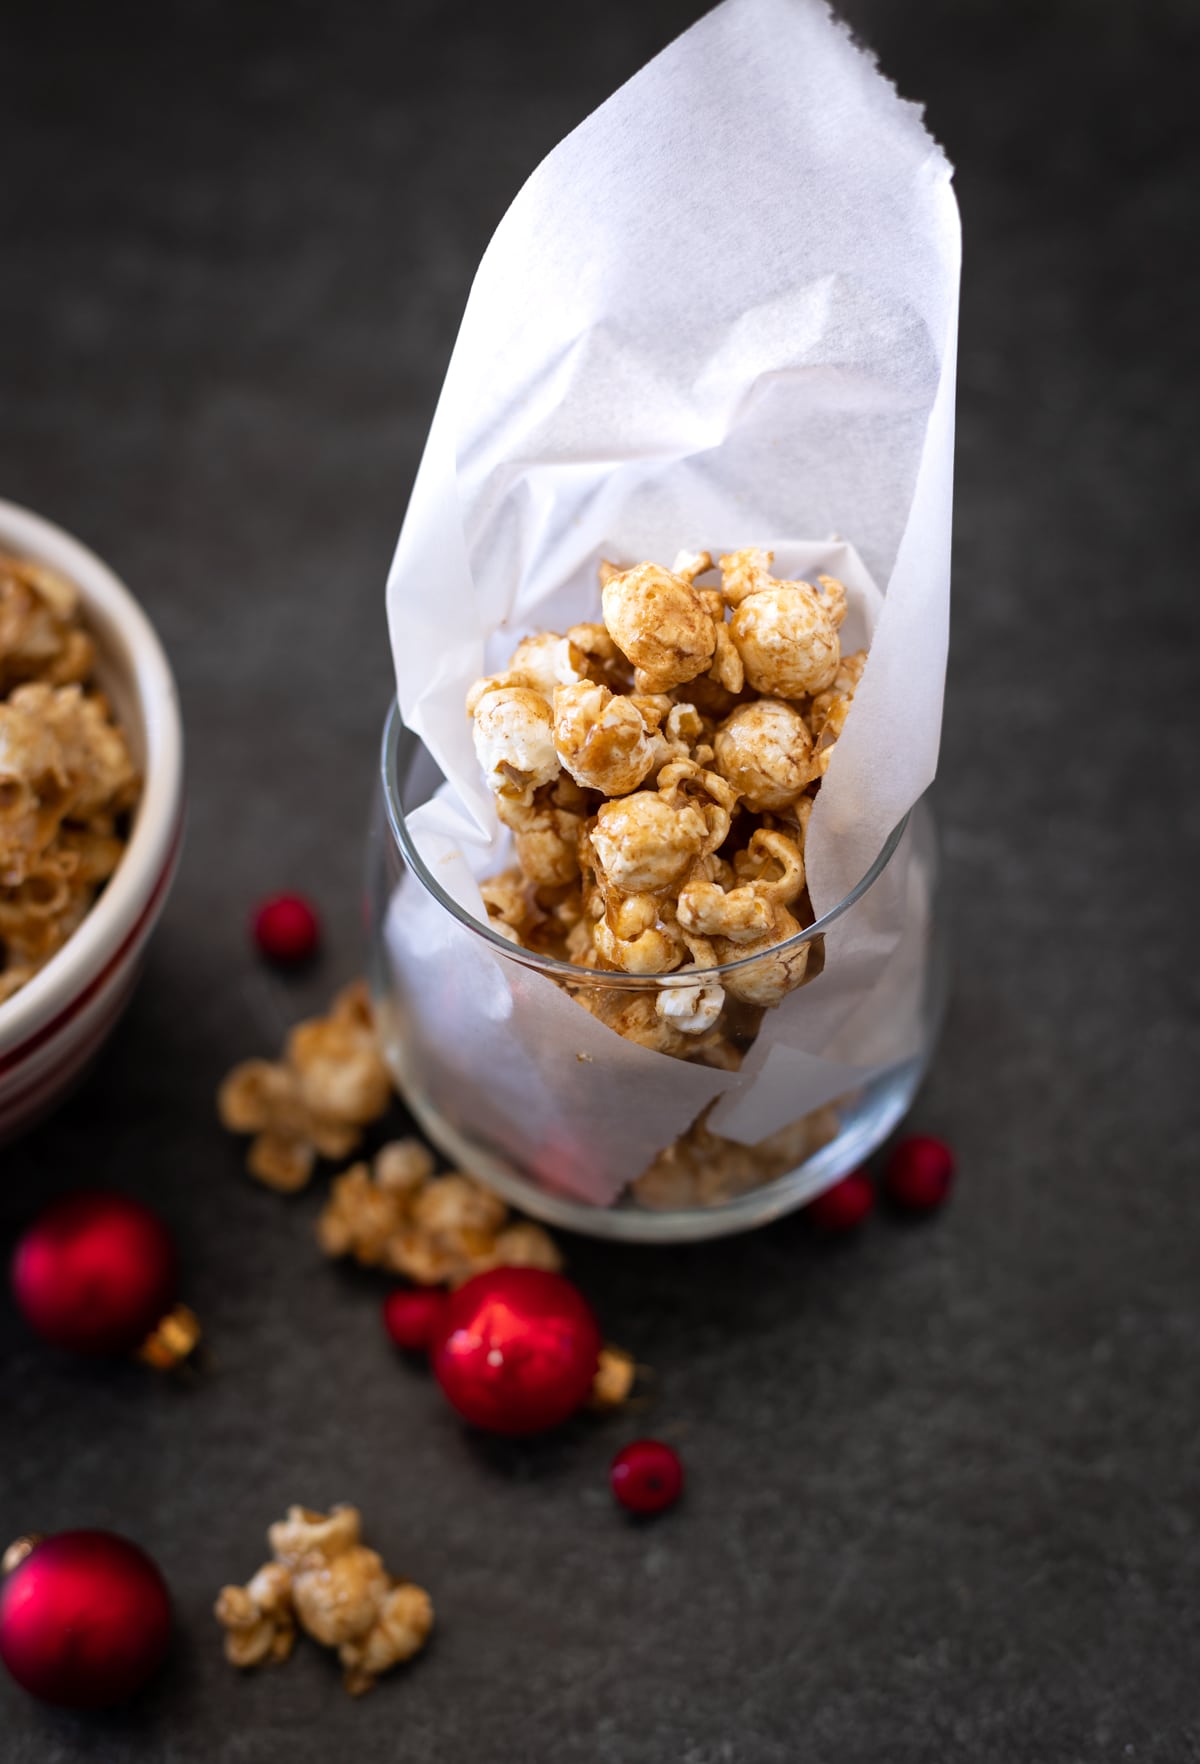 Short glass with white tissue containing Bourbon Caramel Popcorn, red Christmas balls and bowl of popcorn on black table. White tissue paper in glass.